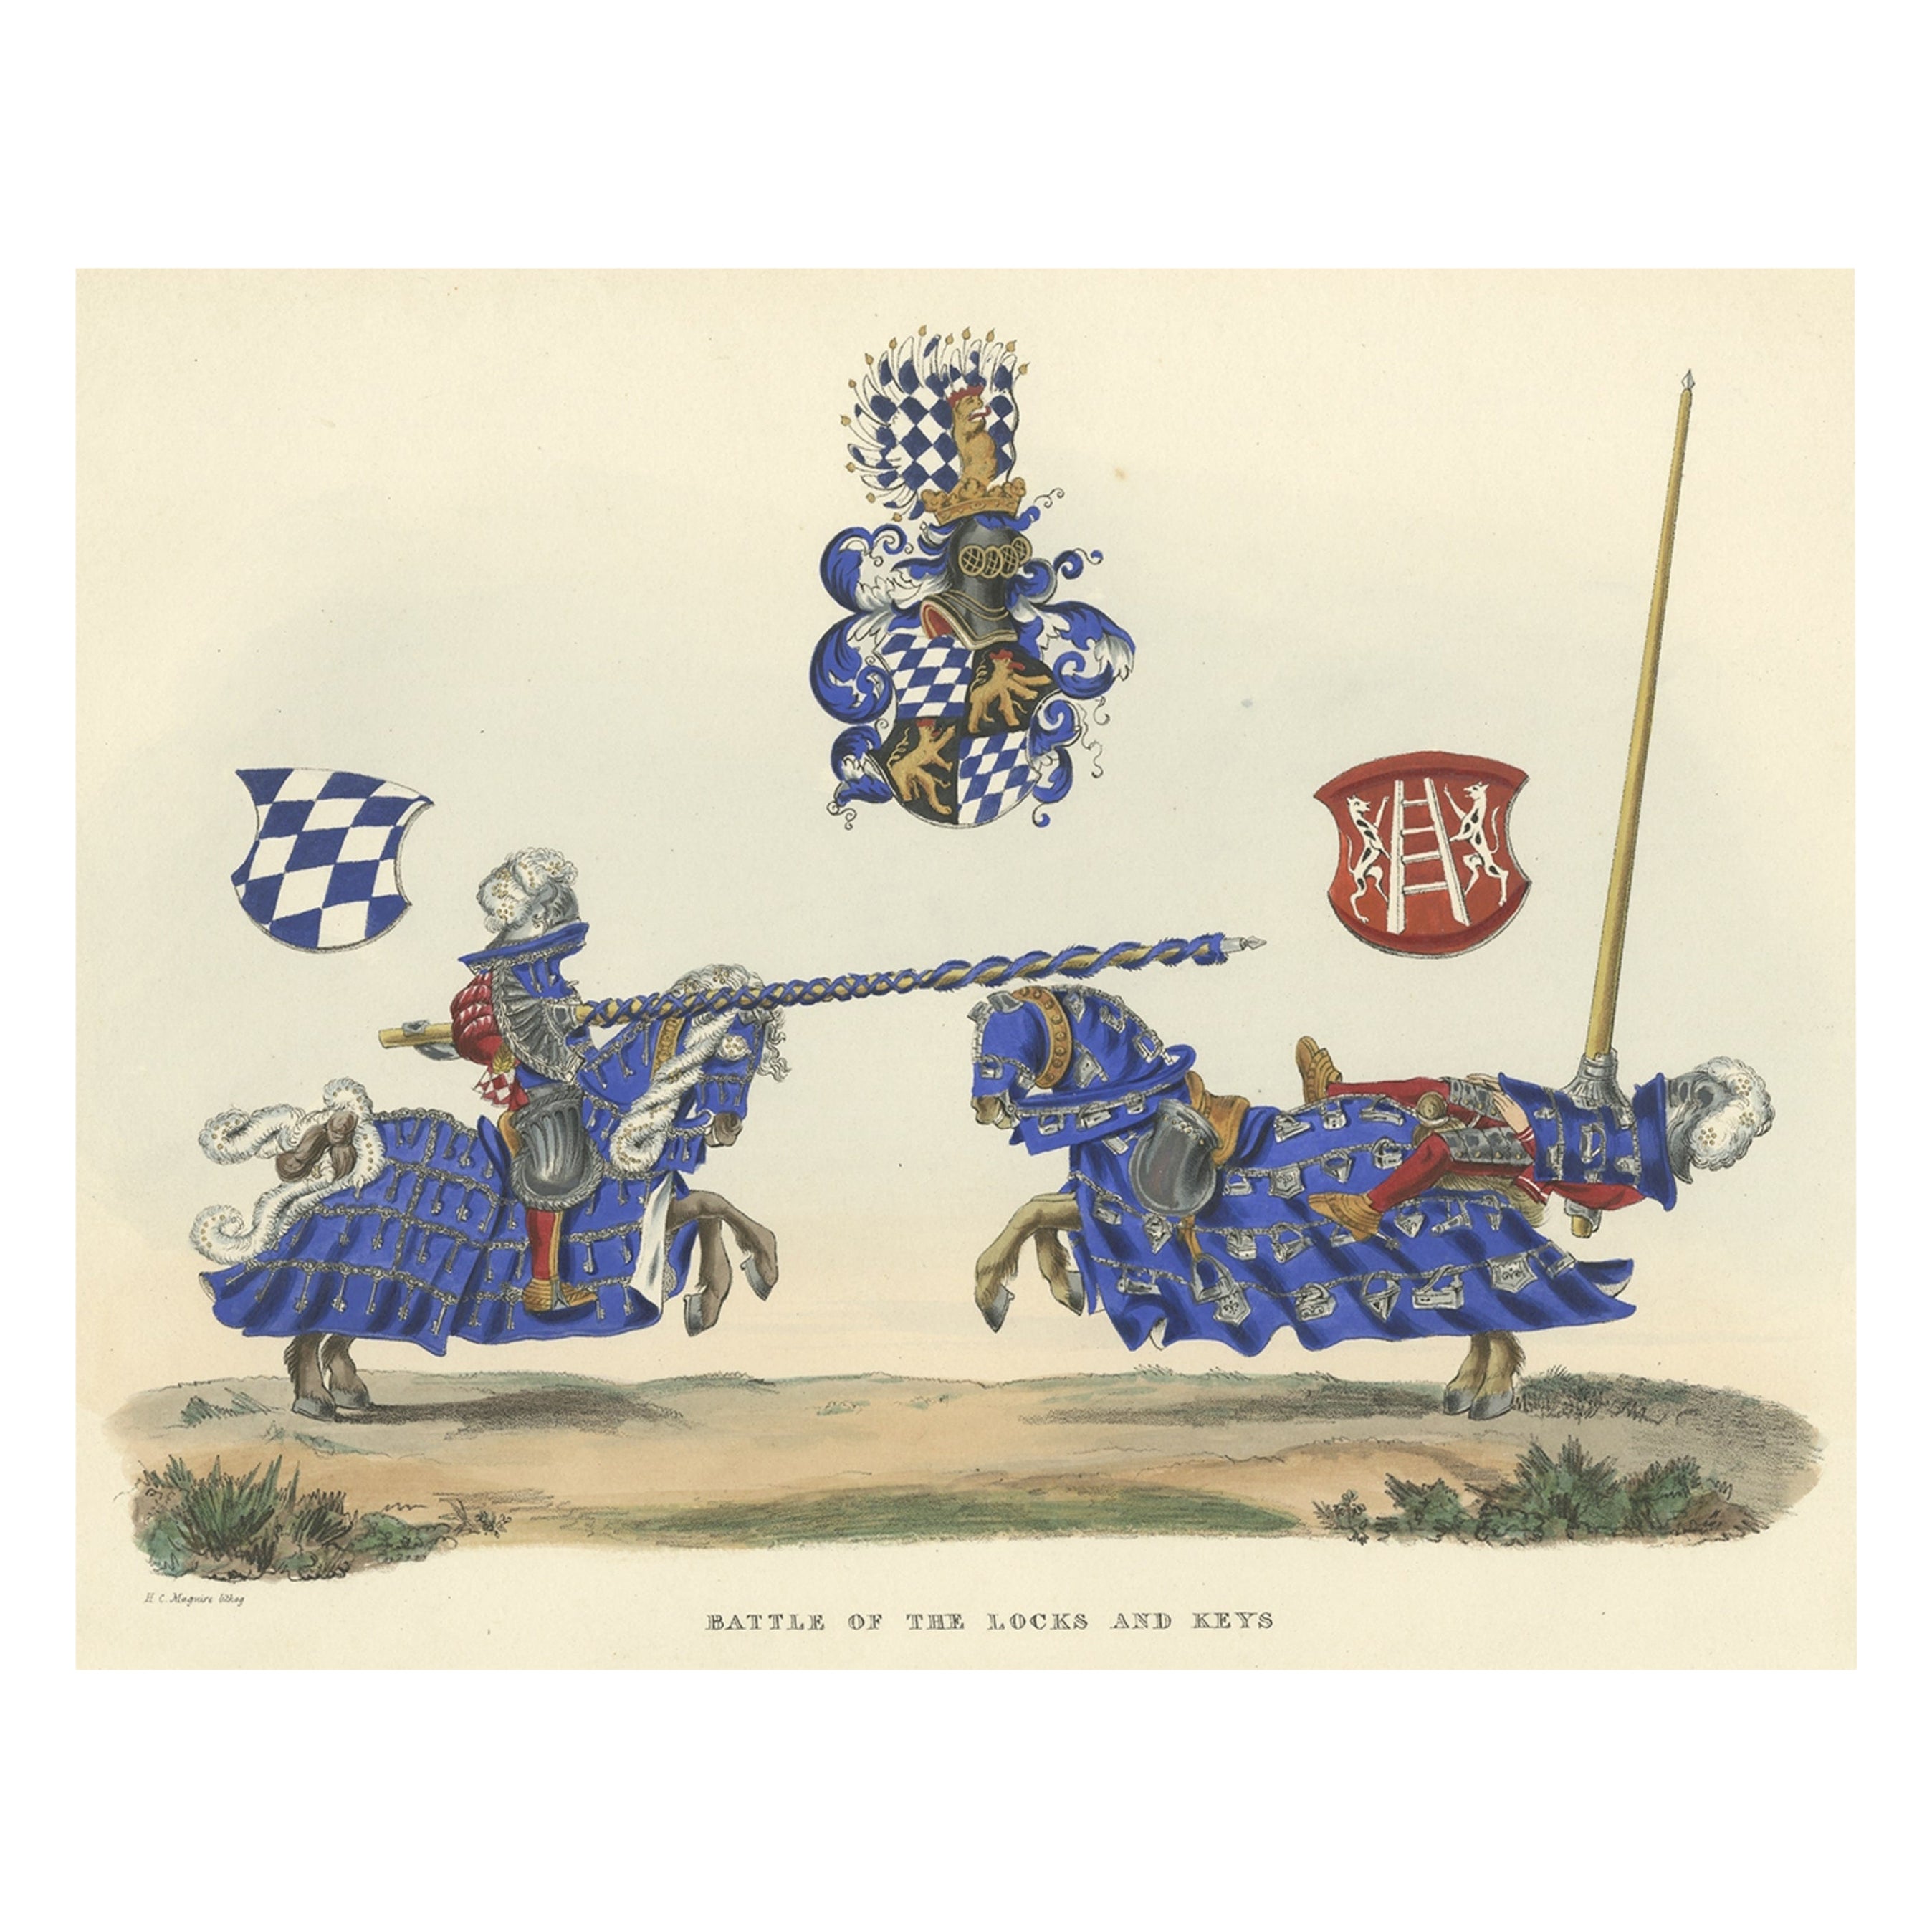 Old Original Print of a Medieval Battle Scene of Knights on Horses, 1842